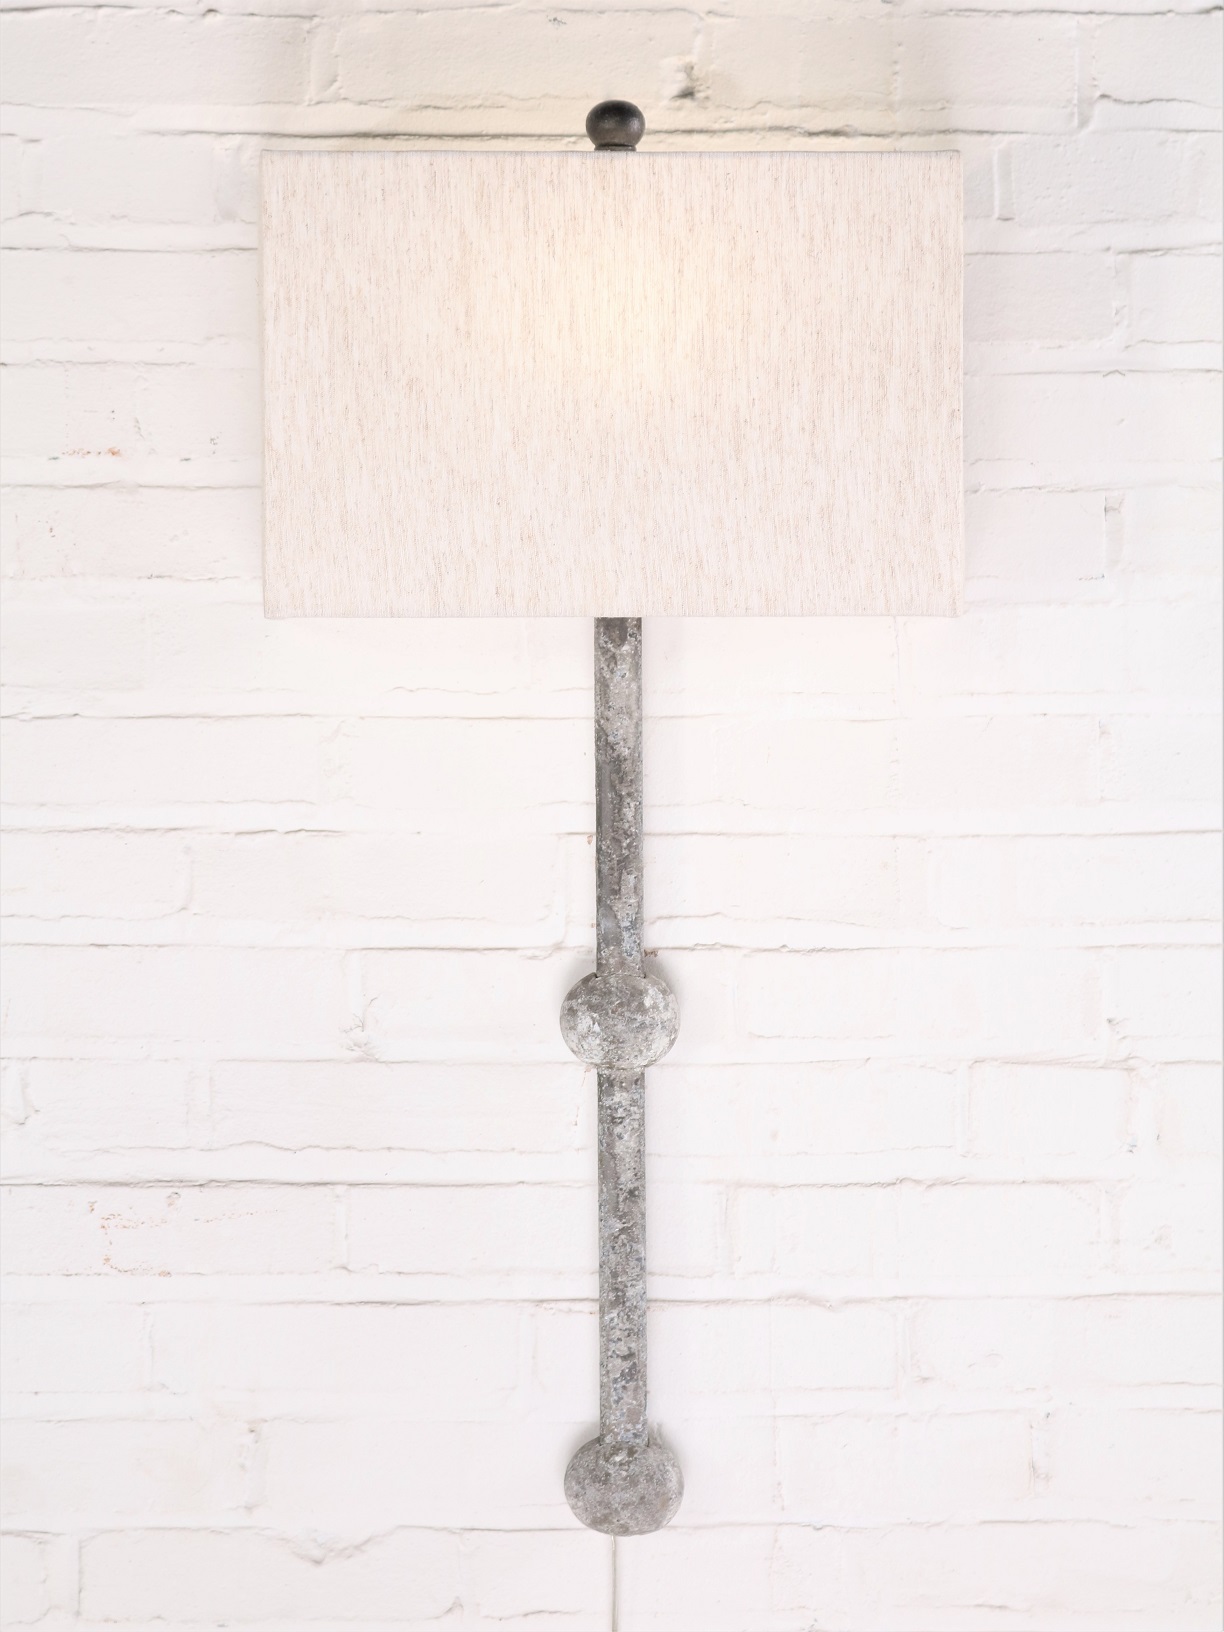 Small sphere custom iron wall sconce with a gray, distressed finish. Paired with a half rectangle linen lamp shade.